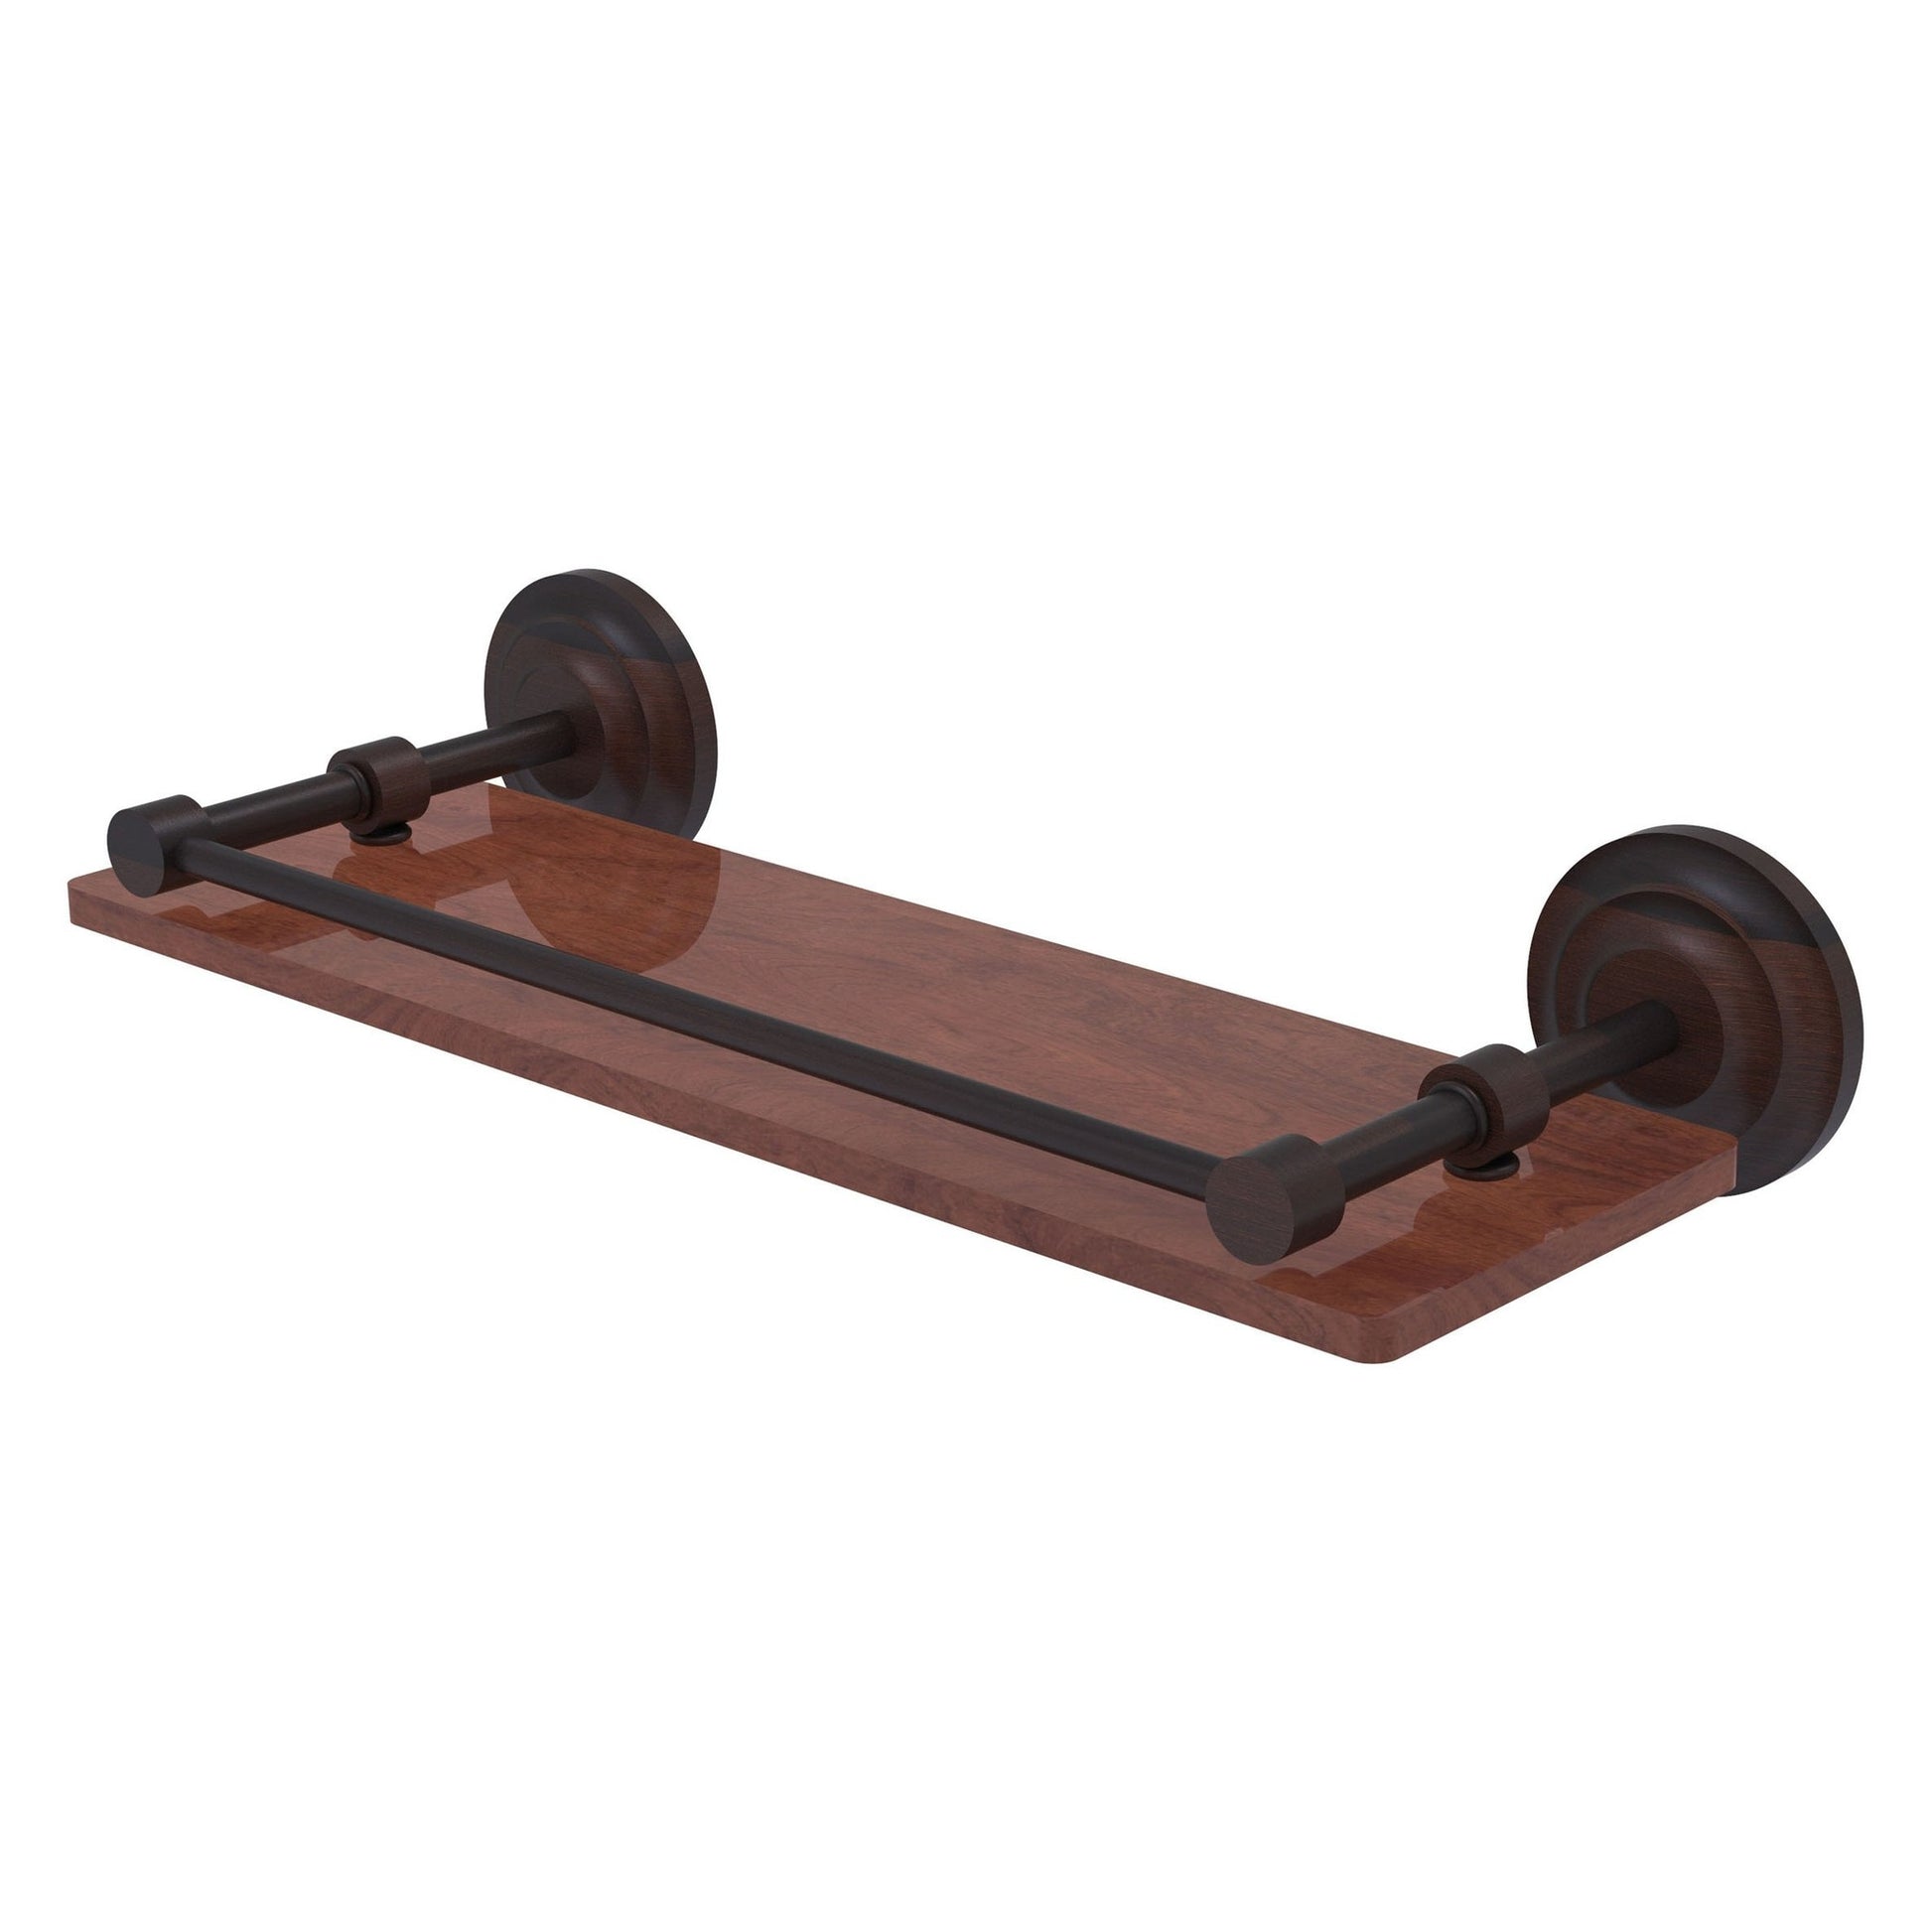 Allied Brass Que New 16" x 5" Venetian Bronze Solid Brass 16-Inch Solid IPE Ironwood Shelf With Gallery Rail